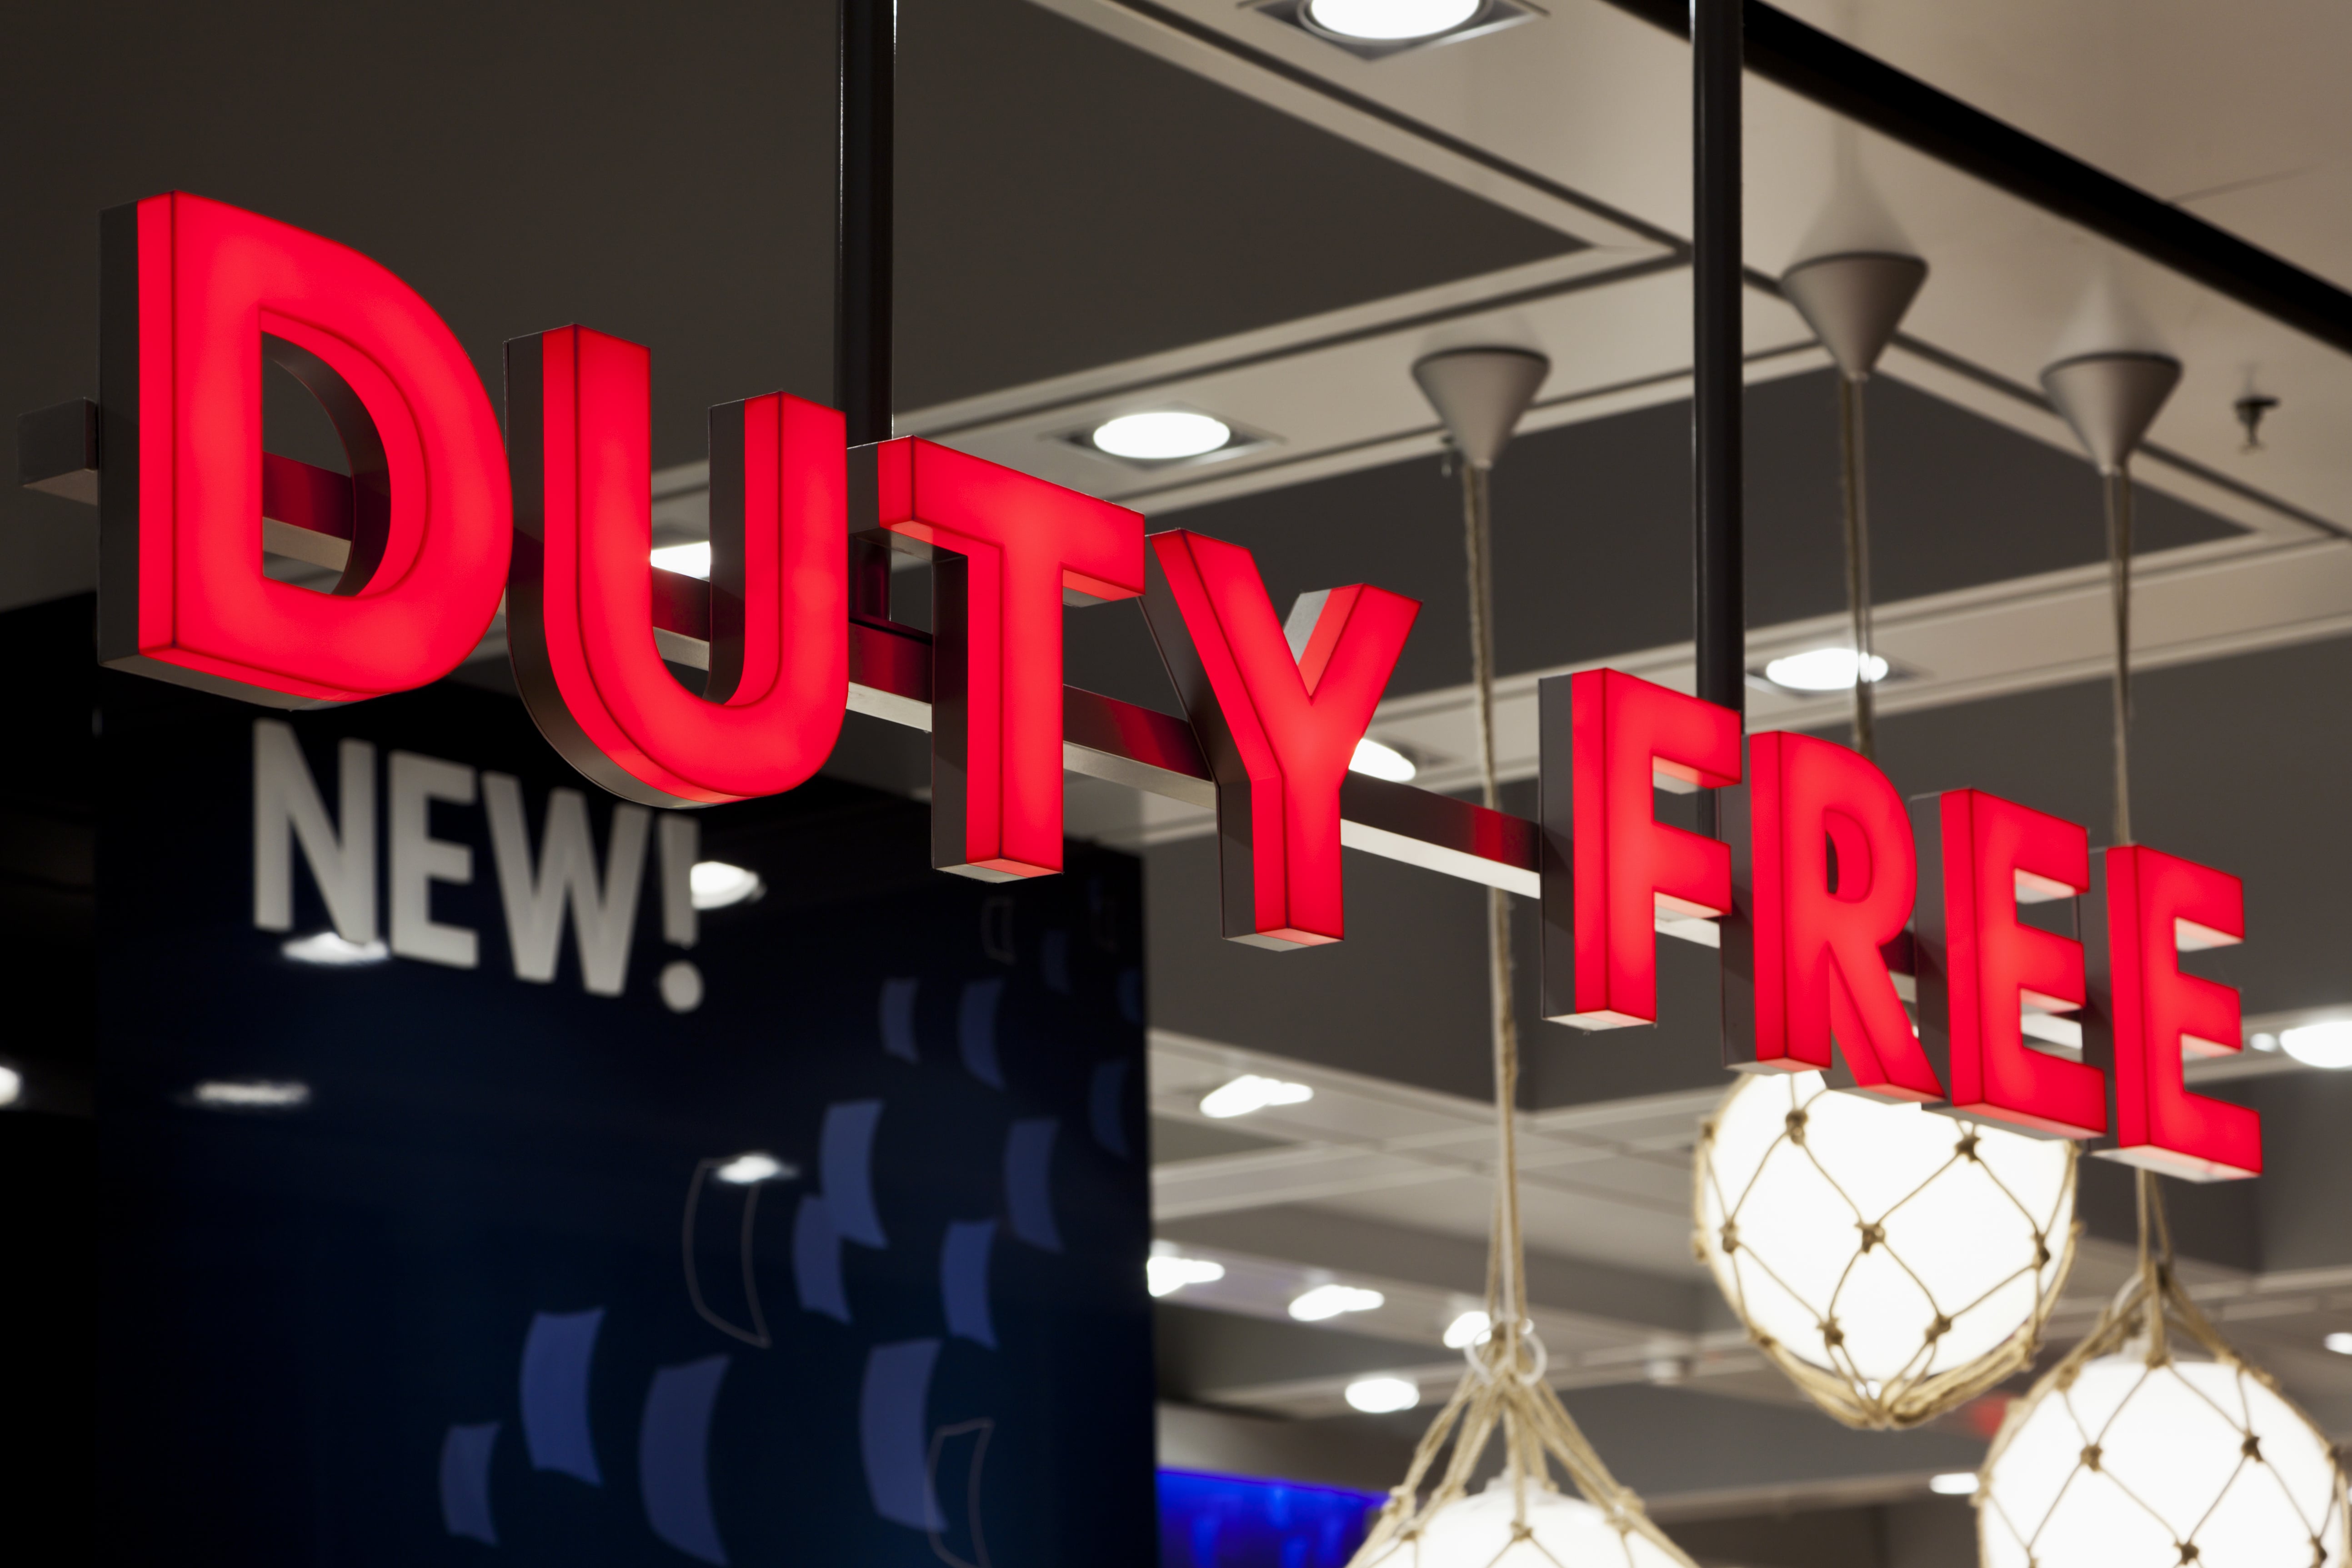 What do Chinese consumers think of Duty Free shops? | Daxue Consulting